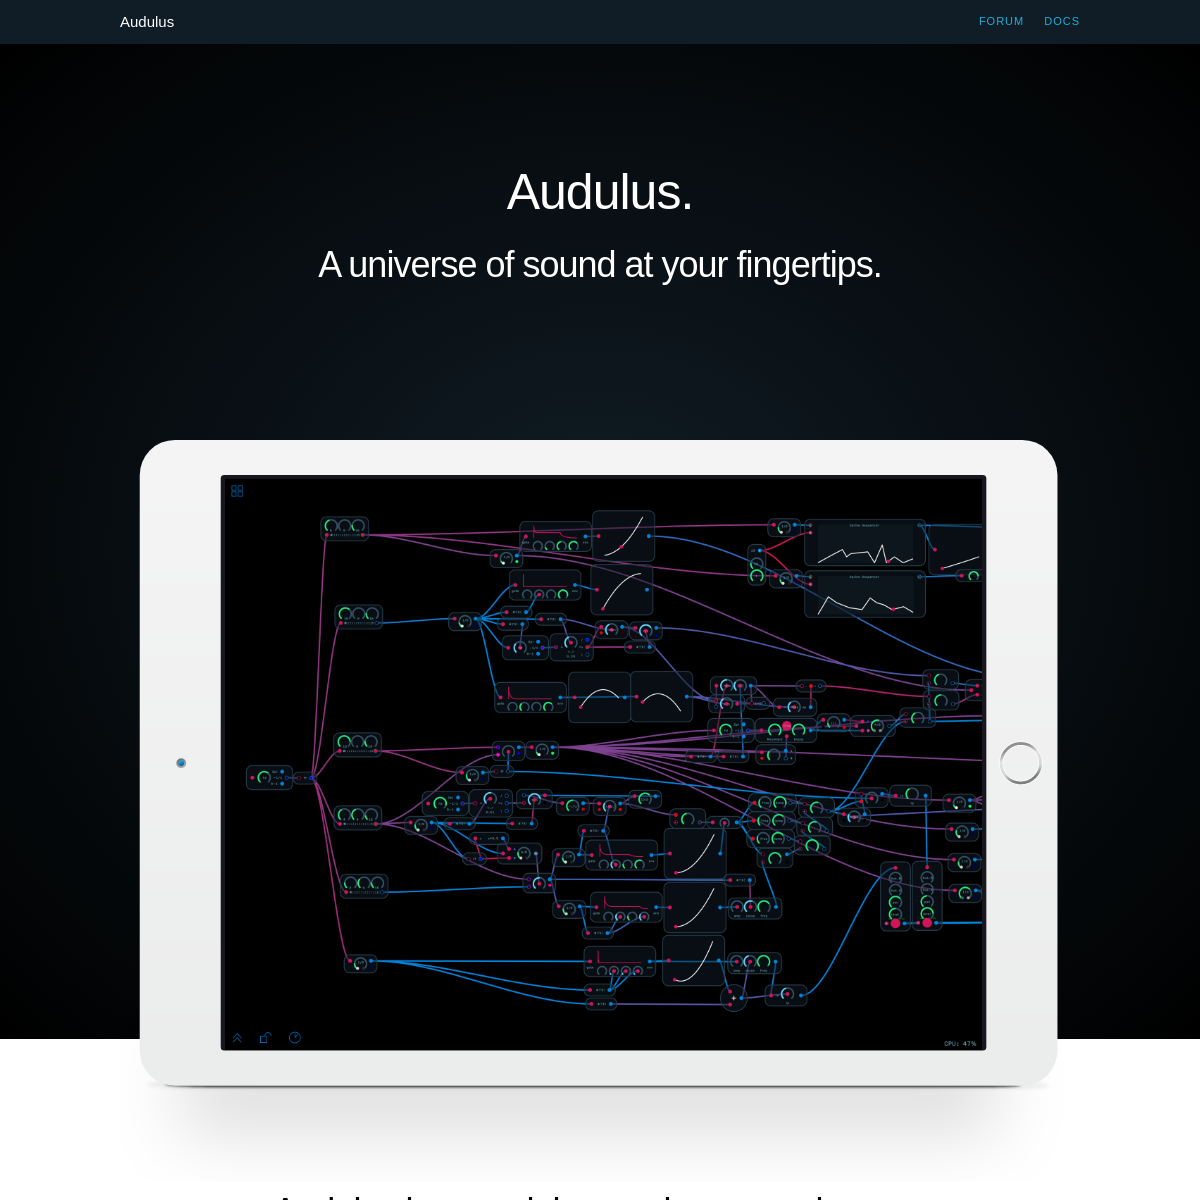 A complete backup of audulus.com